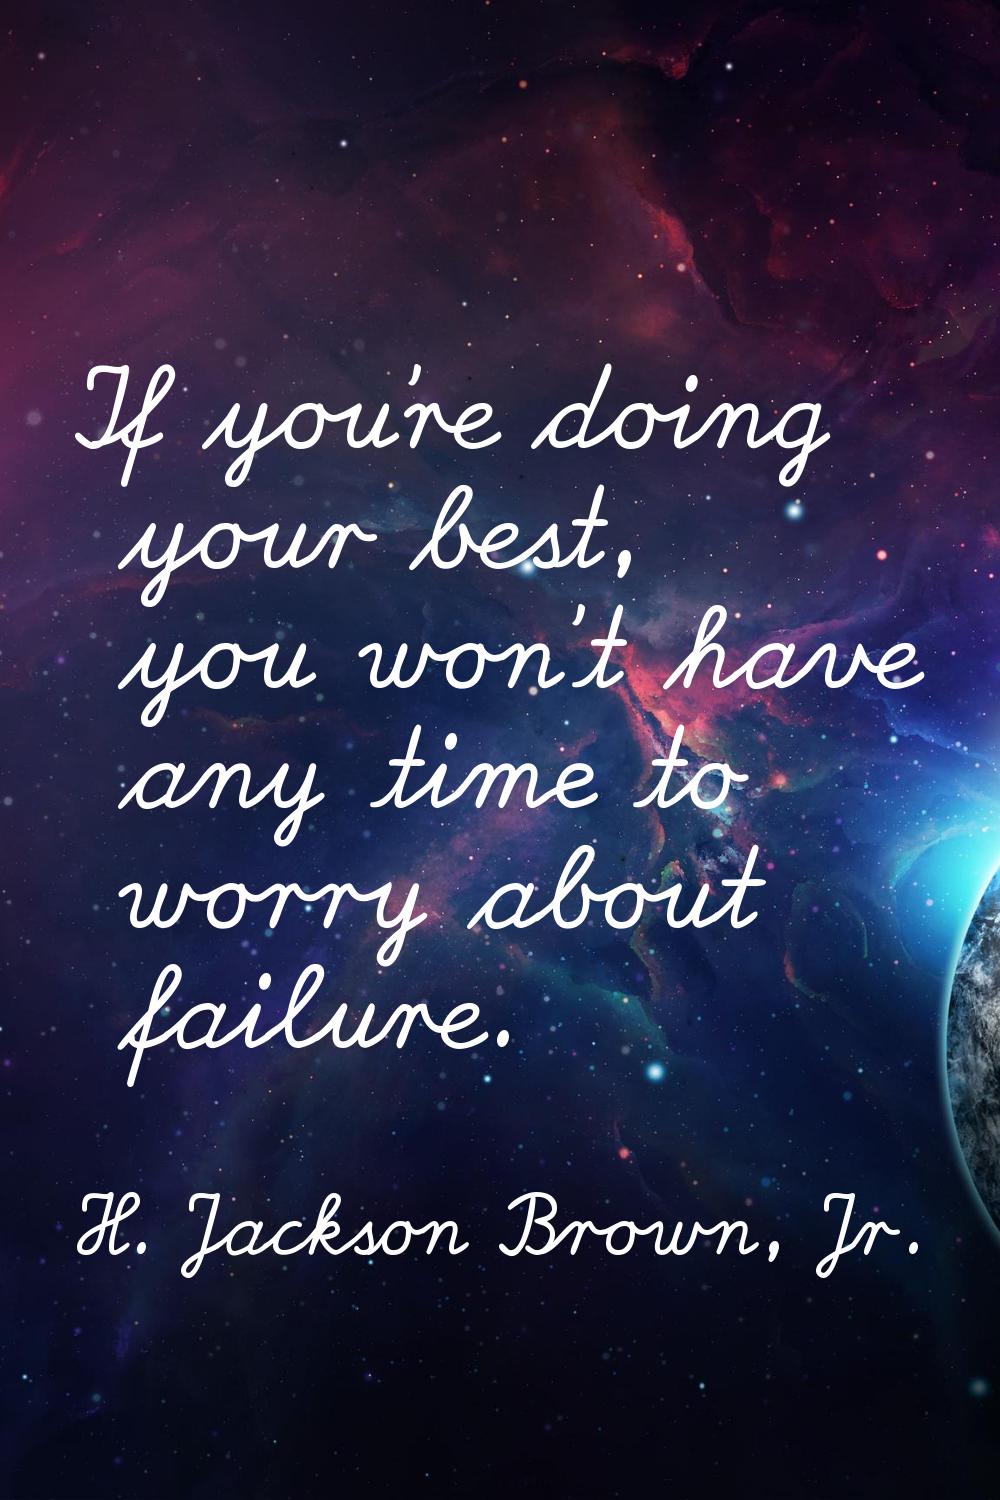 If you're doing your best, you won't have any time to worry about failure.